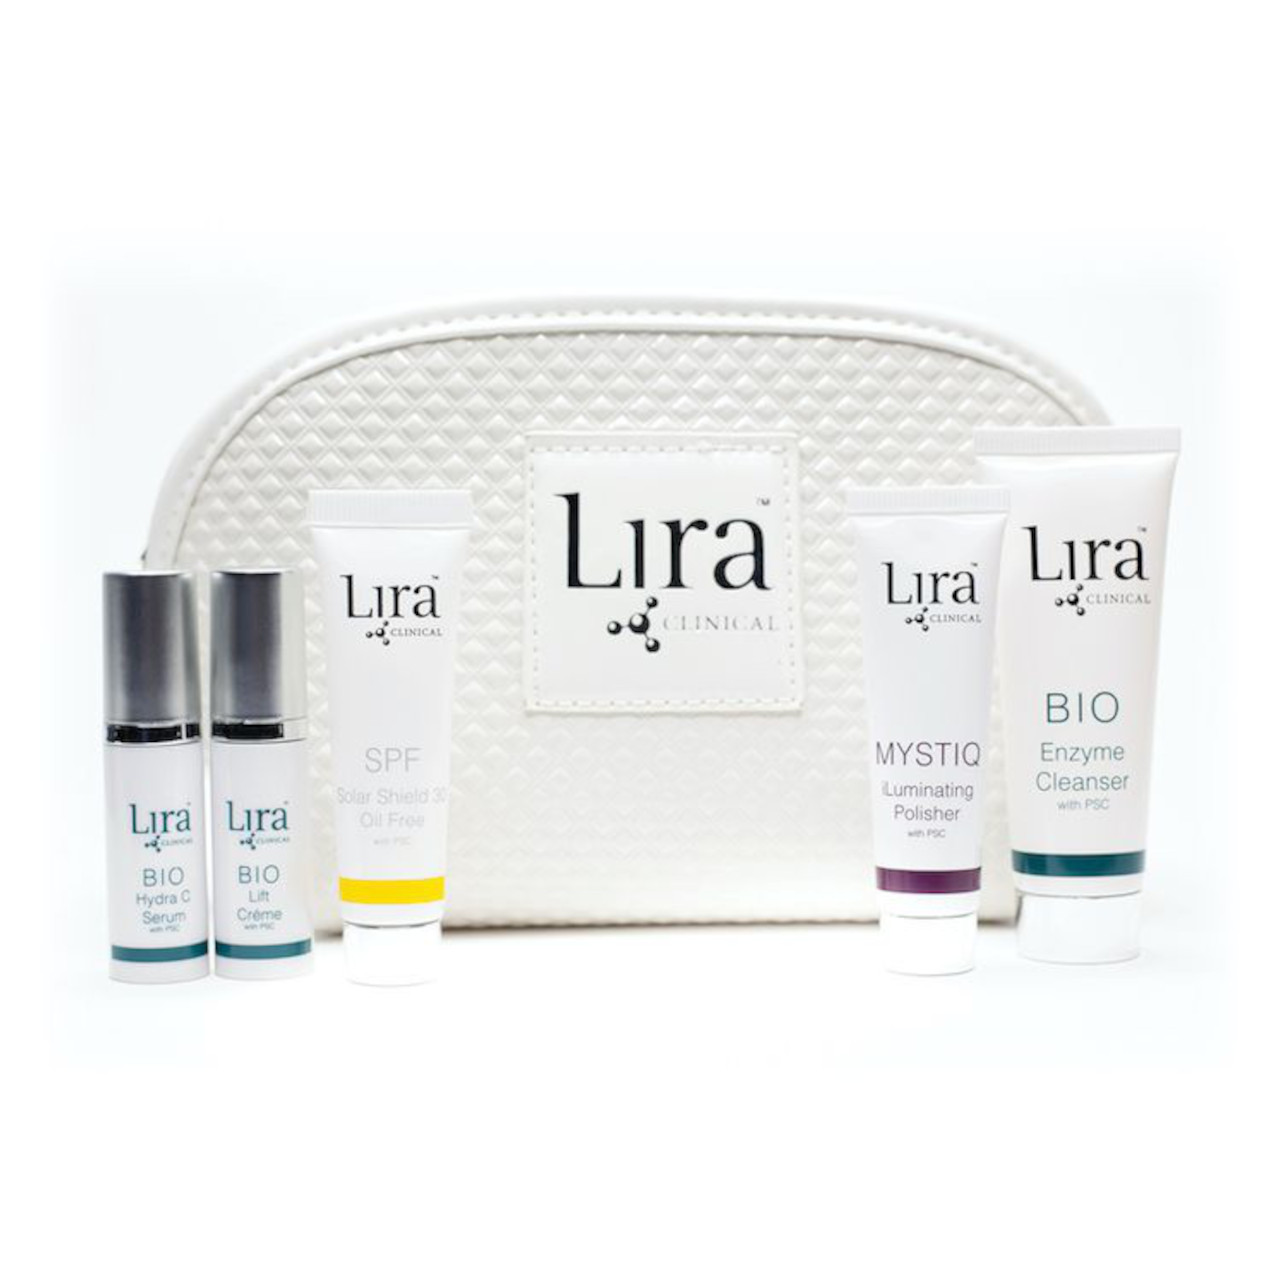 Lira Clinical Travel/Post Care Kit Questions & Answers